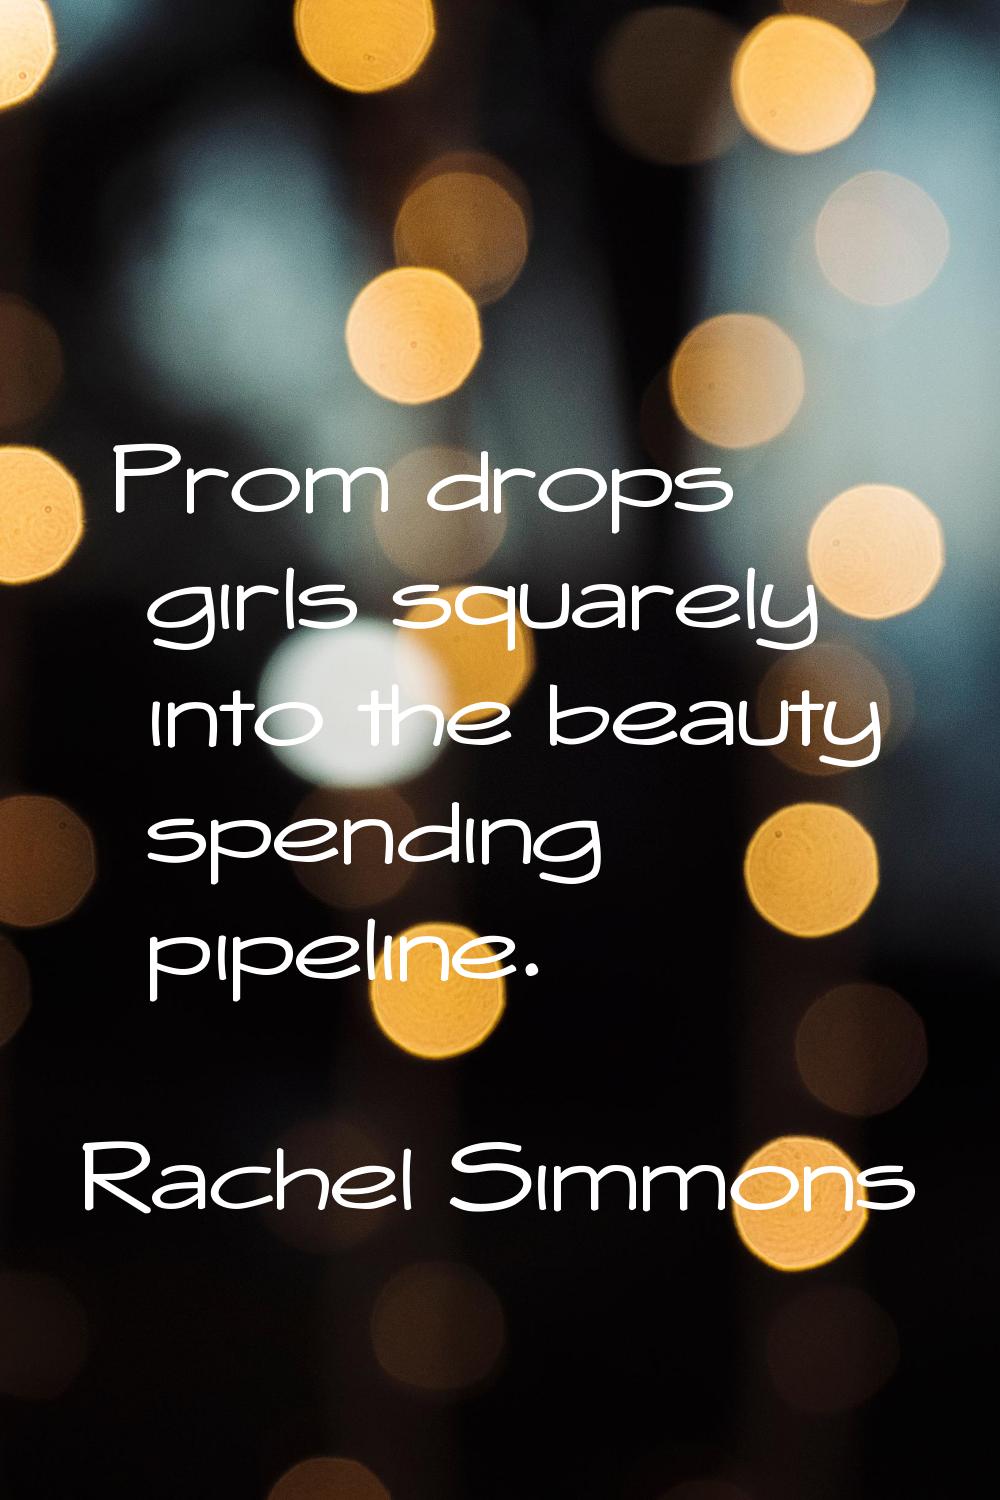 Prom drops girls squarely into the beauty spending pipeline.